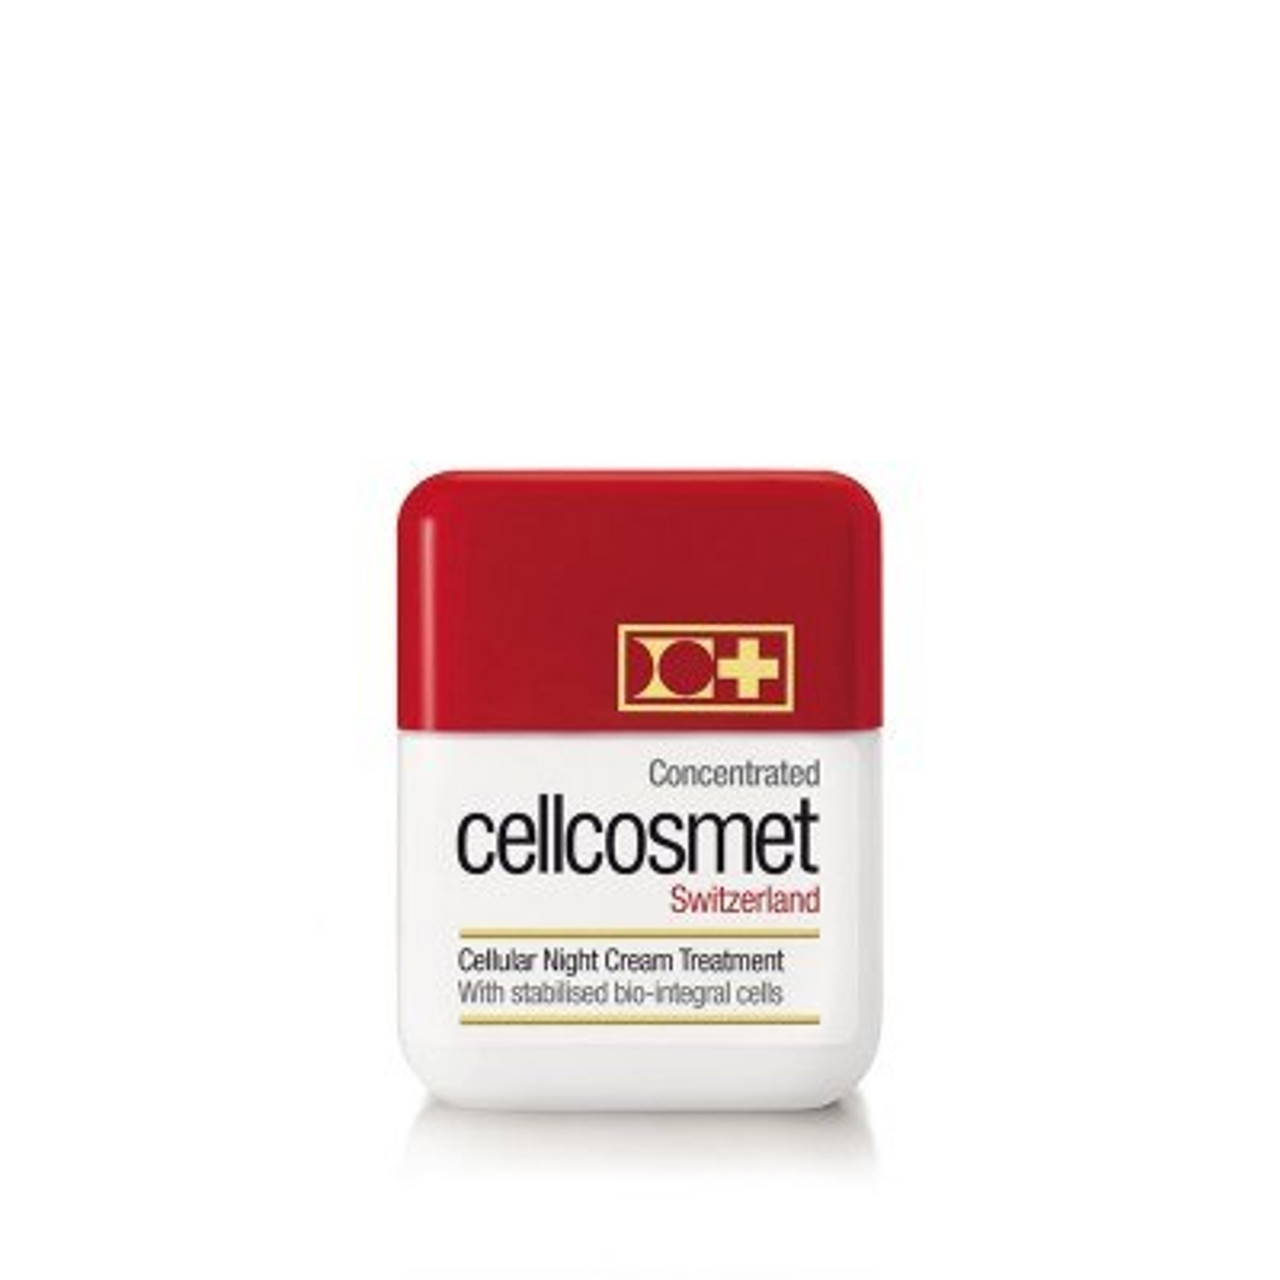 Cellcosmet Concentrated Night - 1.7 oz